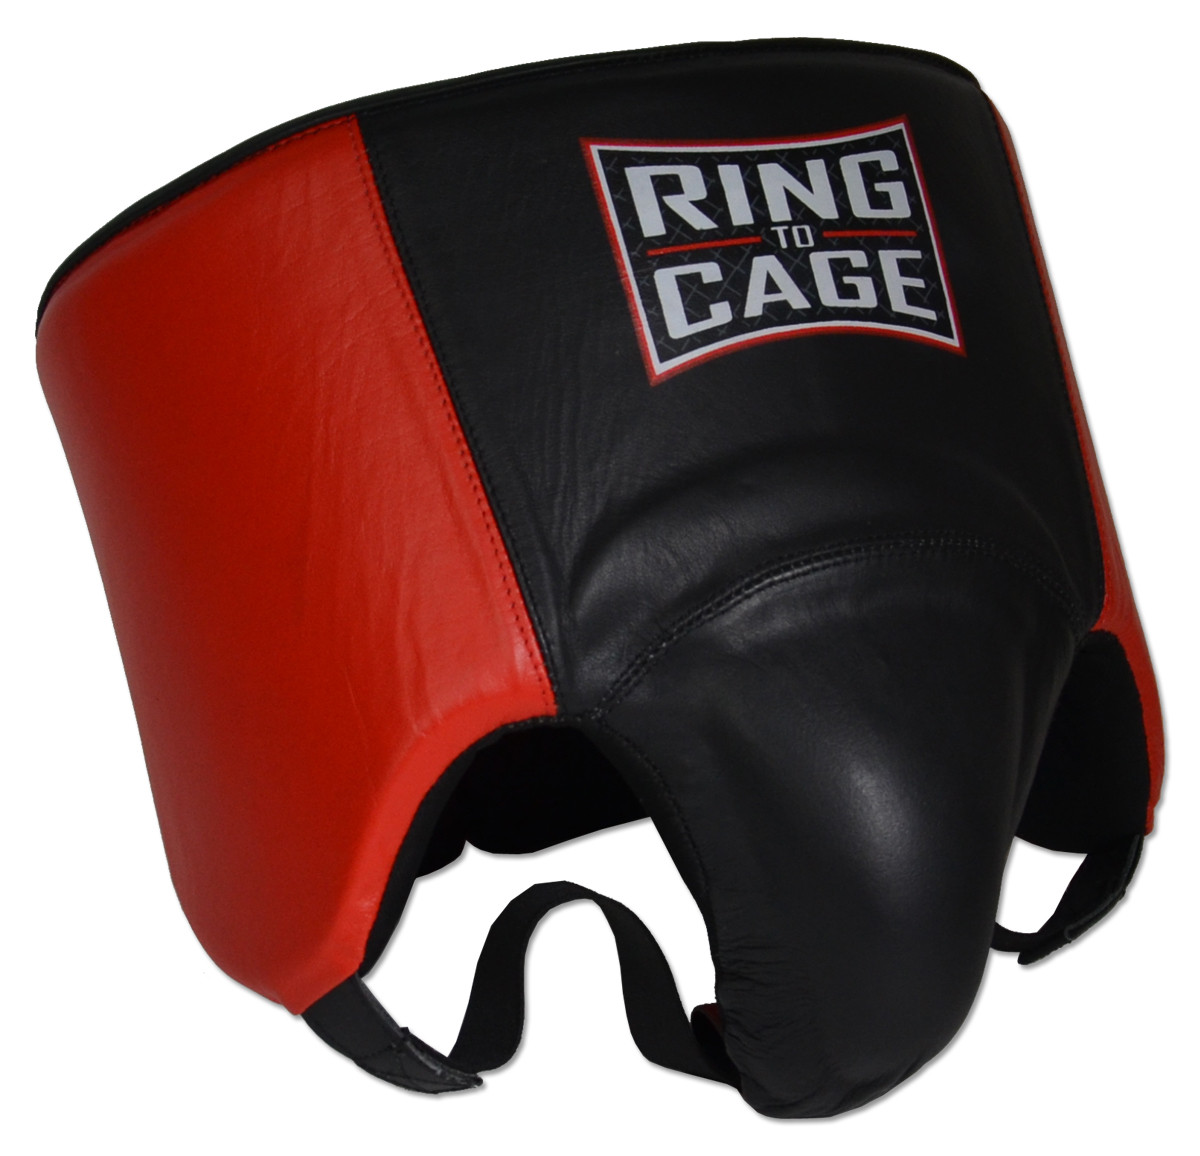 Details about   RINGSIDE  Boxing Kickboxing Martial Arts no foul protector large adult  new 